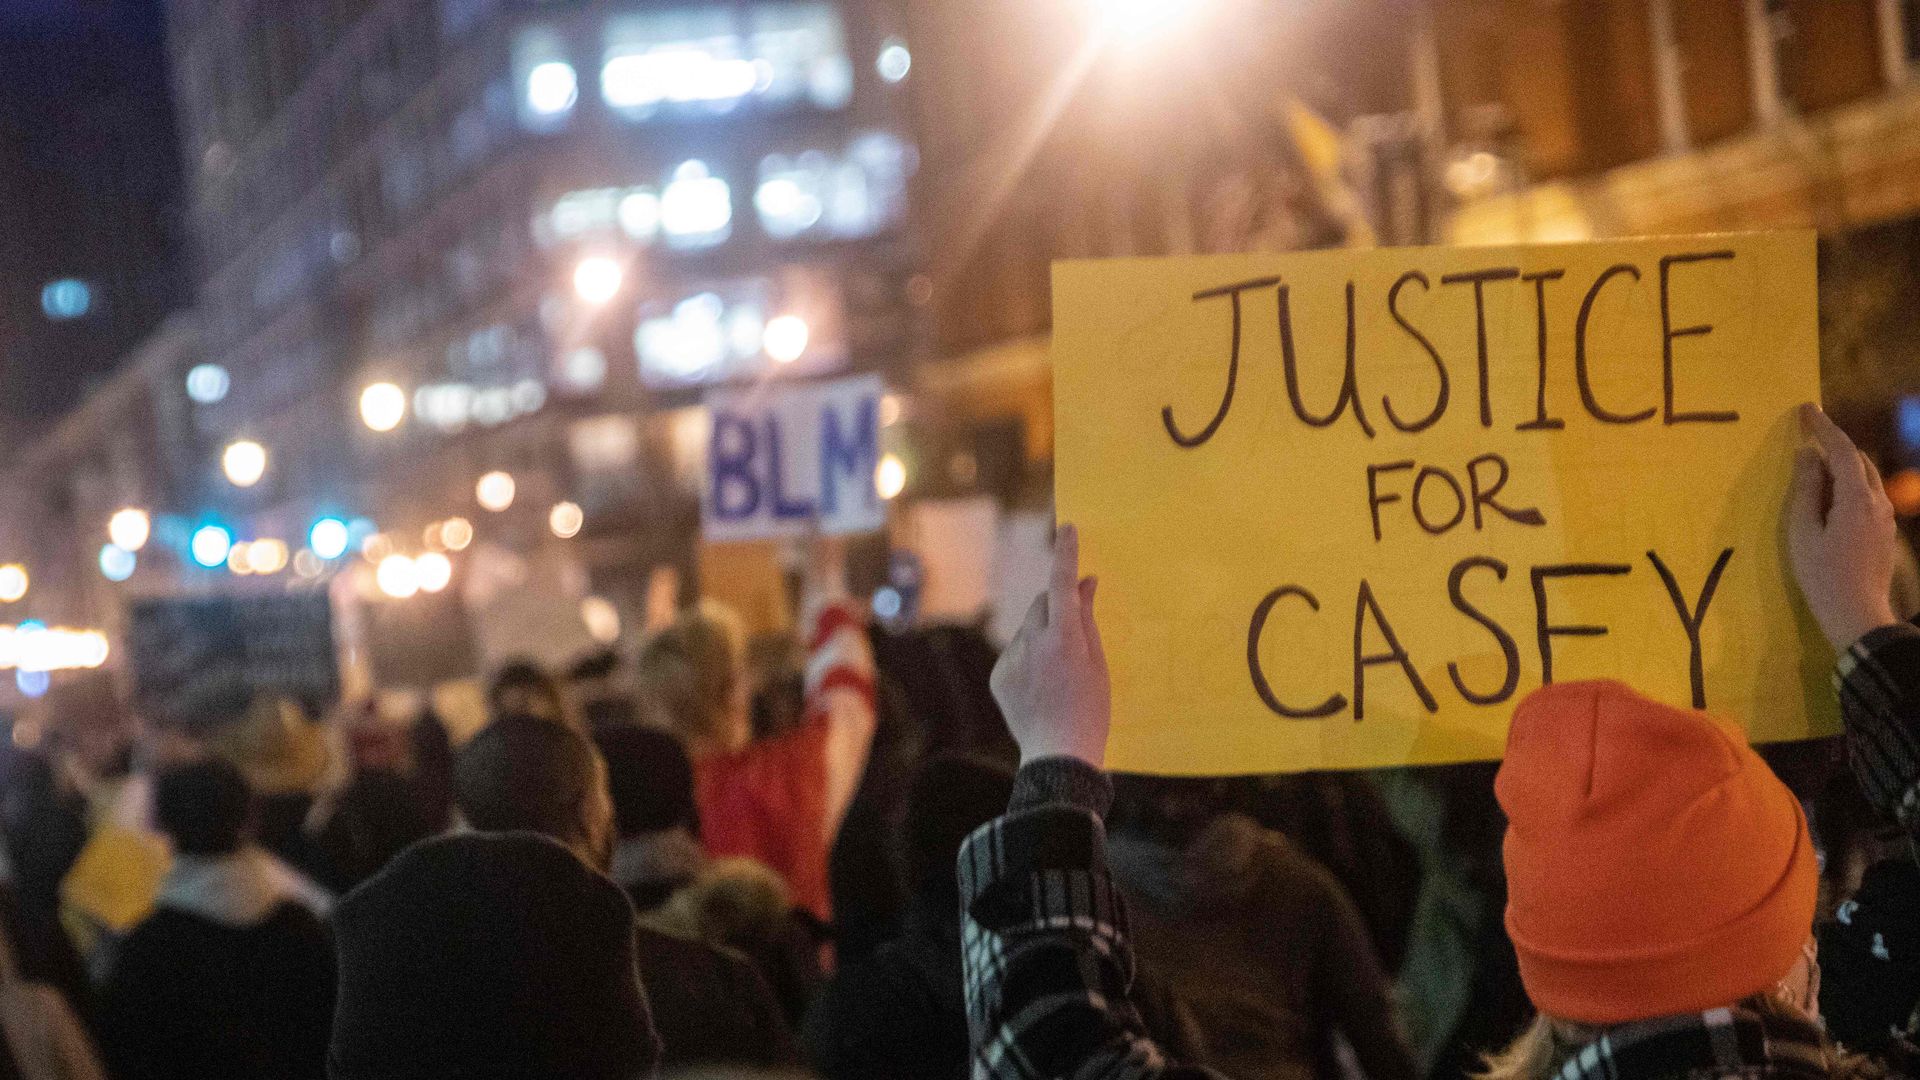 People hold up signs during a march for Casey Goodson Jr. in Columbus, Ohio on December 11, 2020. - Casey Goodson Jr., a 23-year-old Black man, was shot and killed by law enforcement on December 4